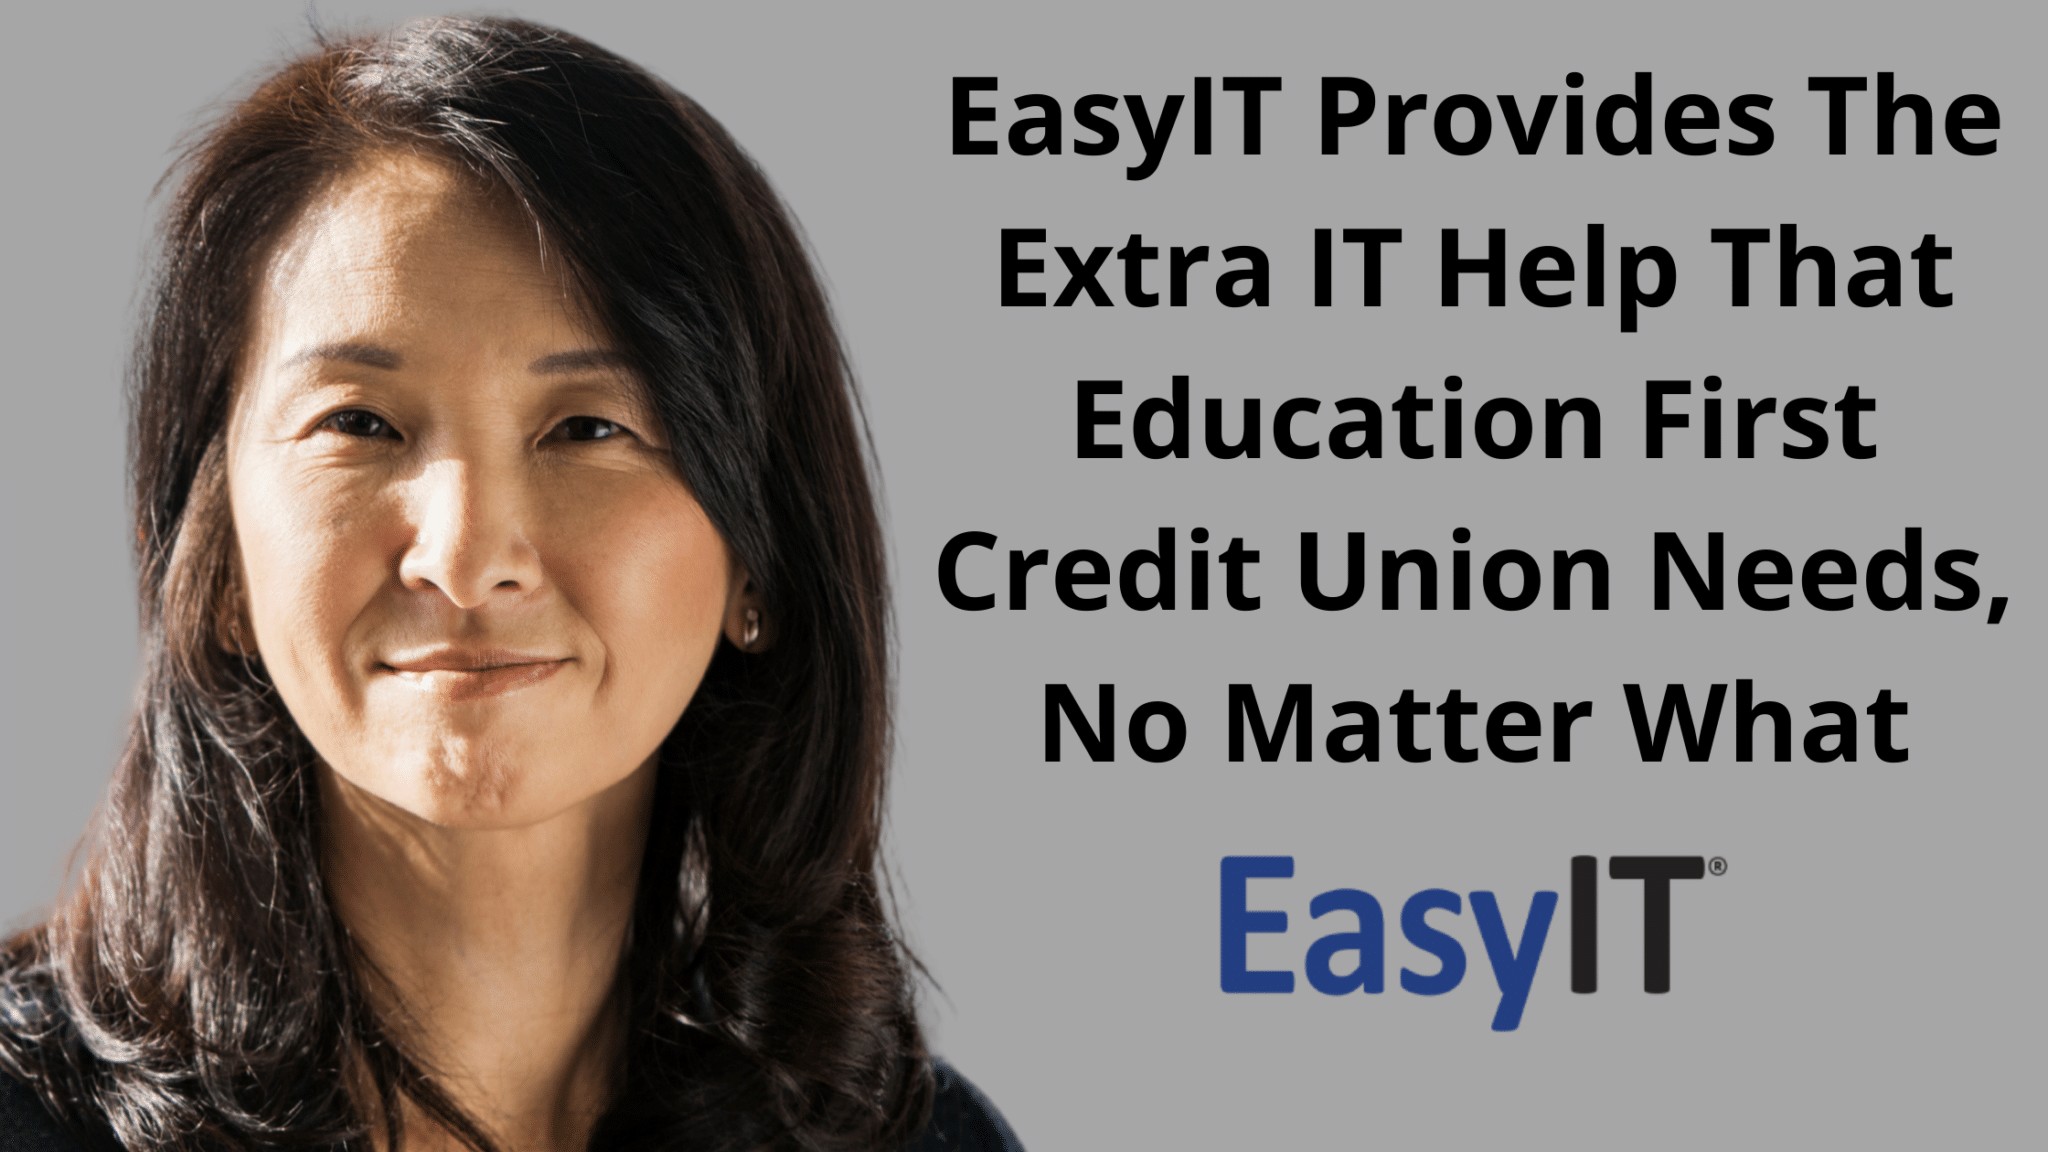 EasyIT Provides The Extra IT Help That Education First Credit Union Needs, No Matter What